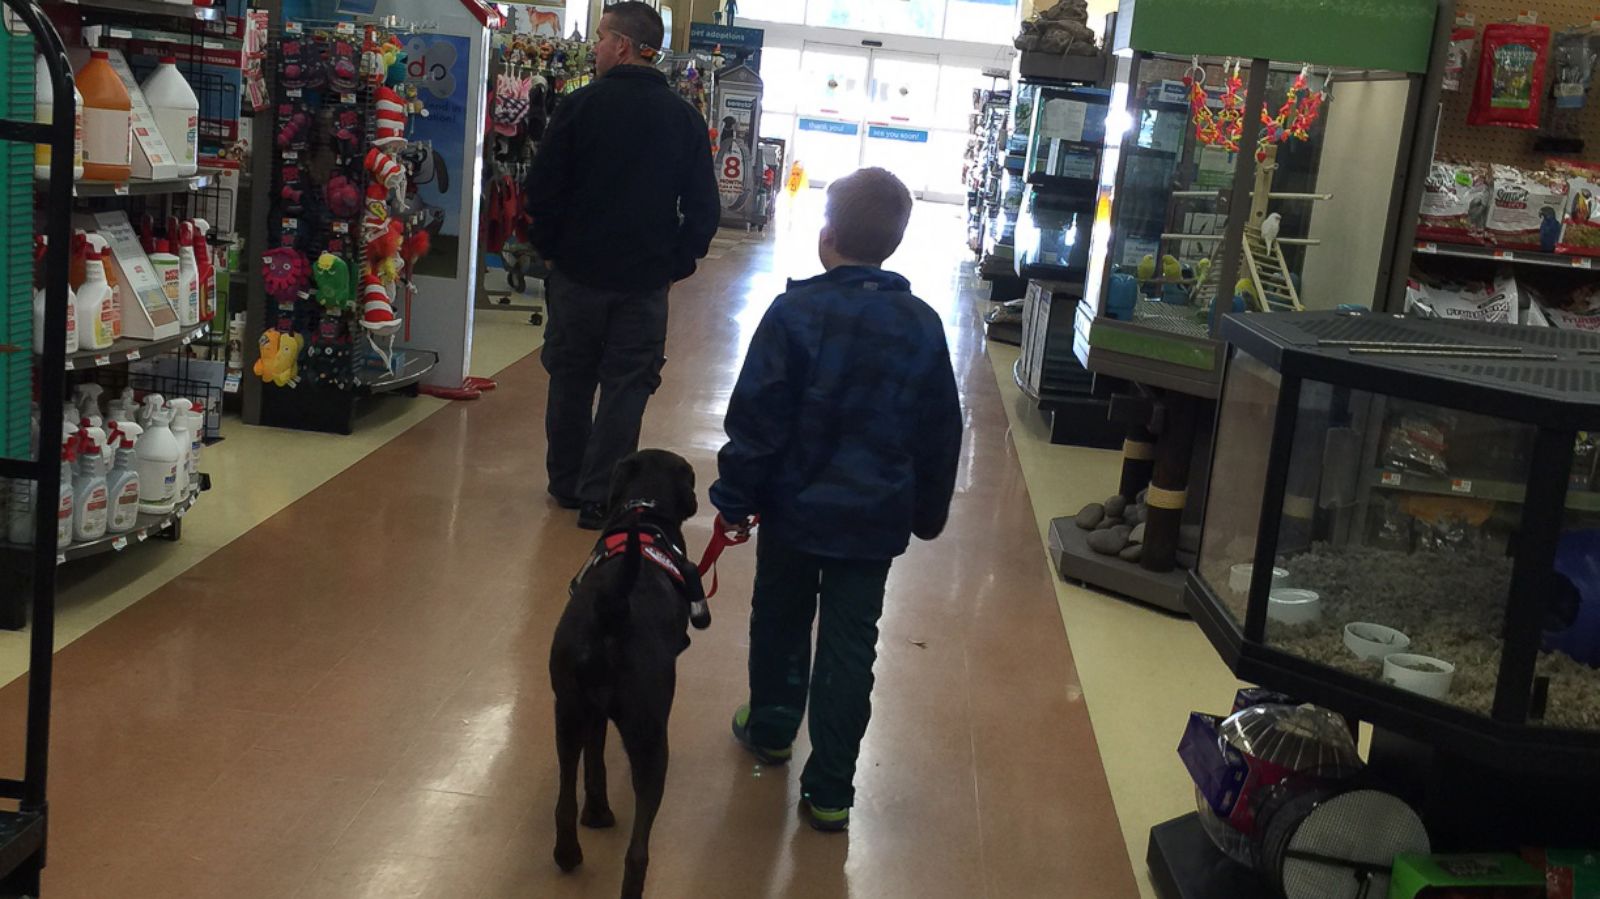 Boy With Diabetes Who Collected Coins for 4 Years Finally Gets His Dog